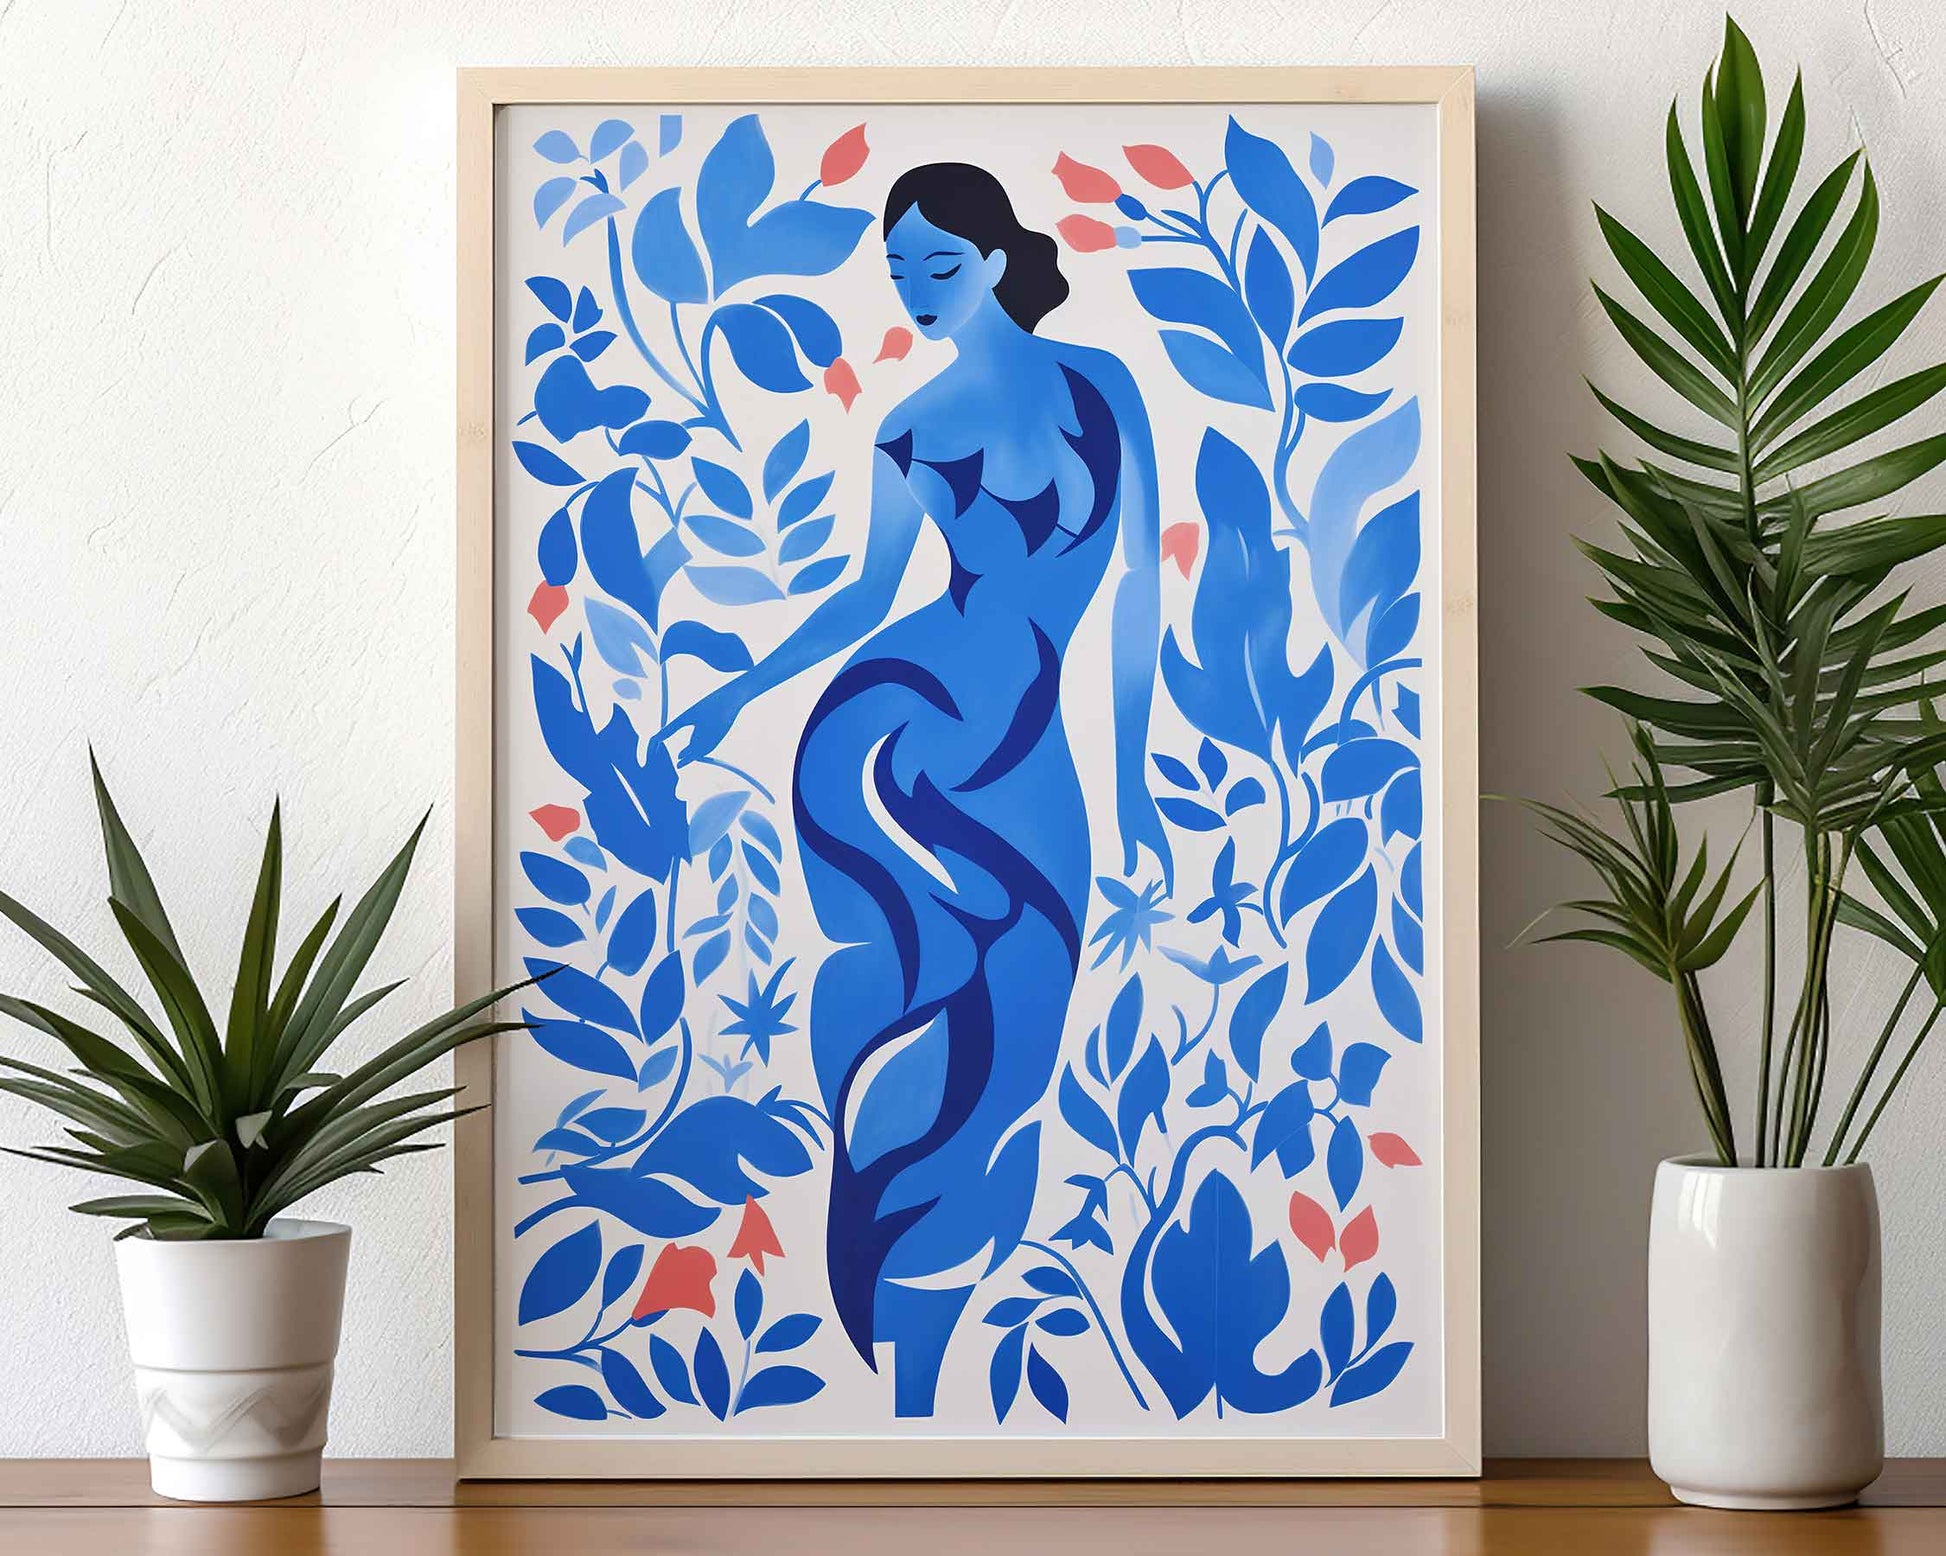 Framed Image of Matisse Wall Poster Style Print Blue Art Themed Oil Paintings